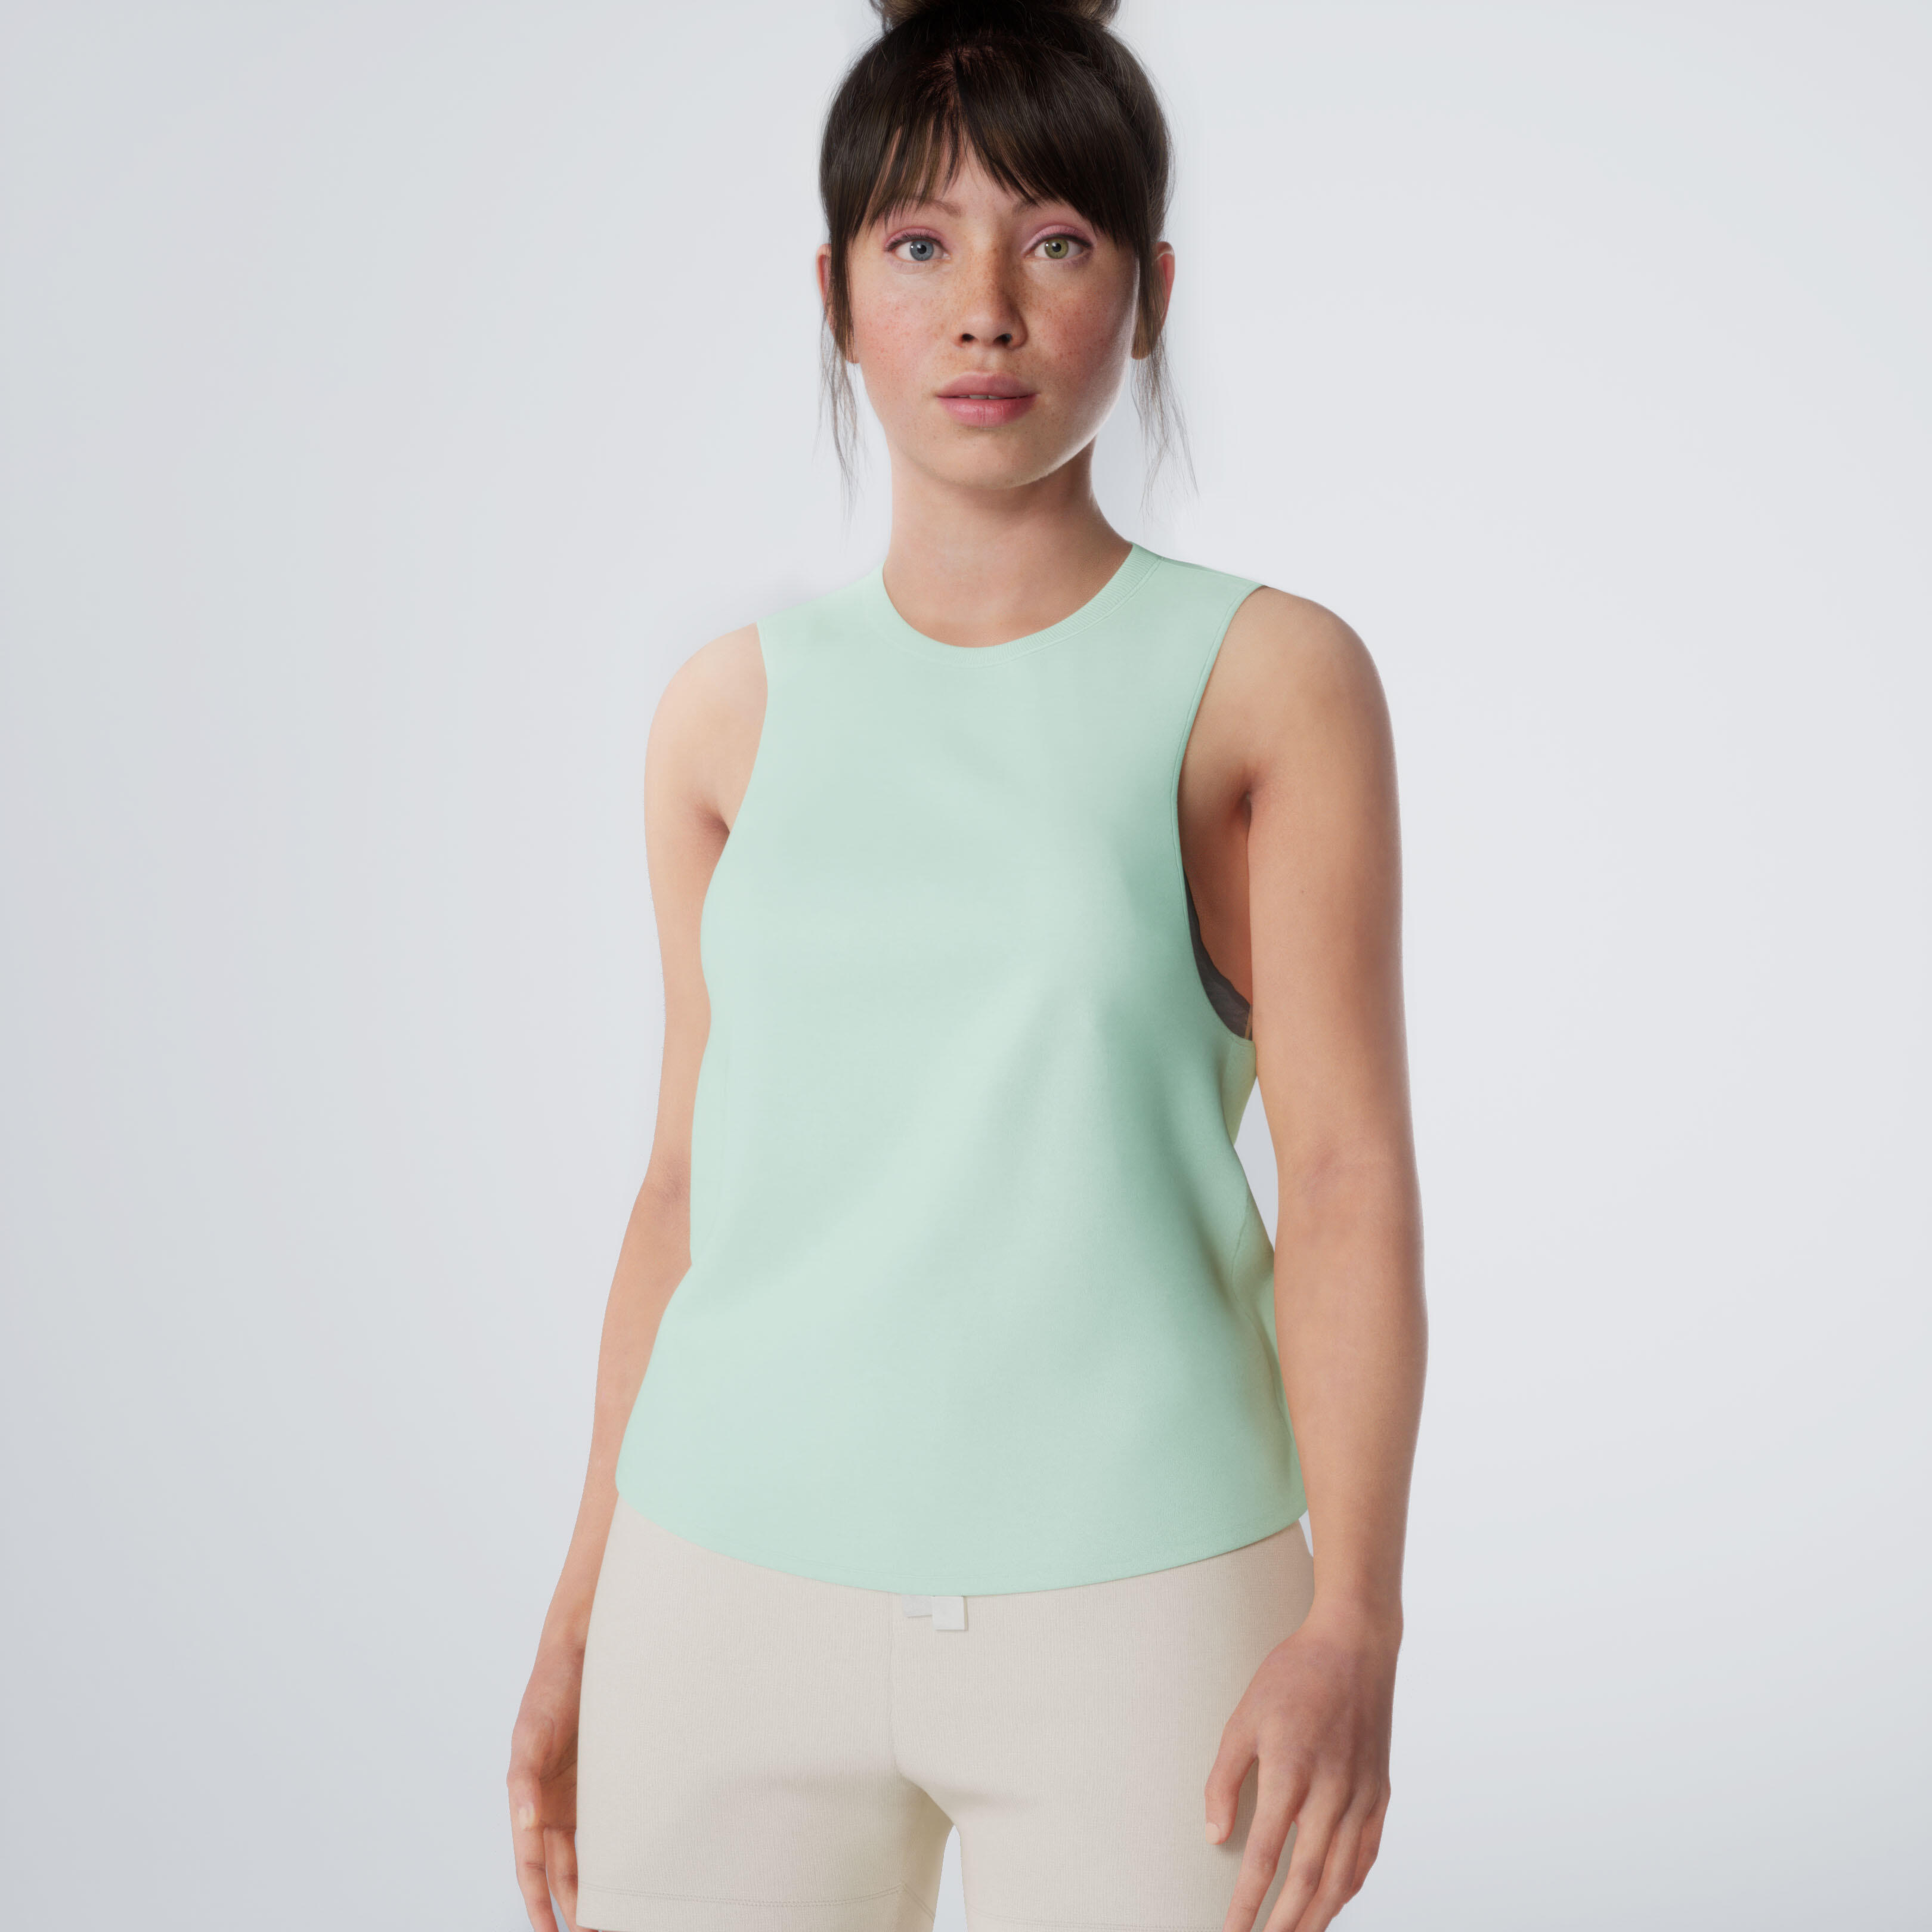 Women's Loose-Fit Cotton Tank Top - Green